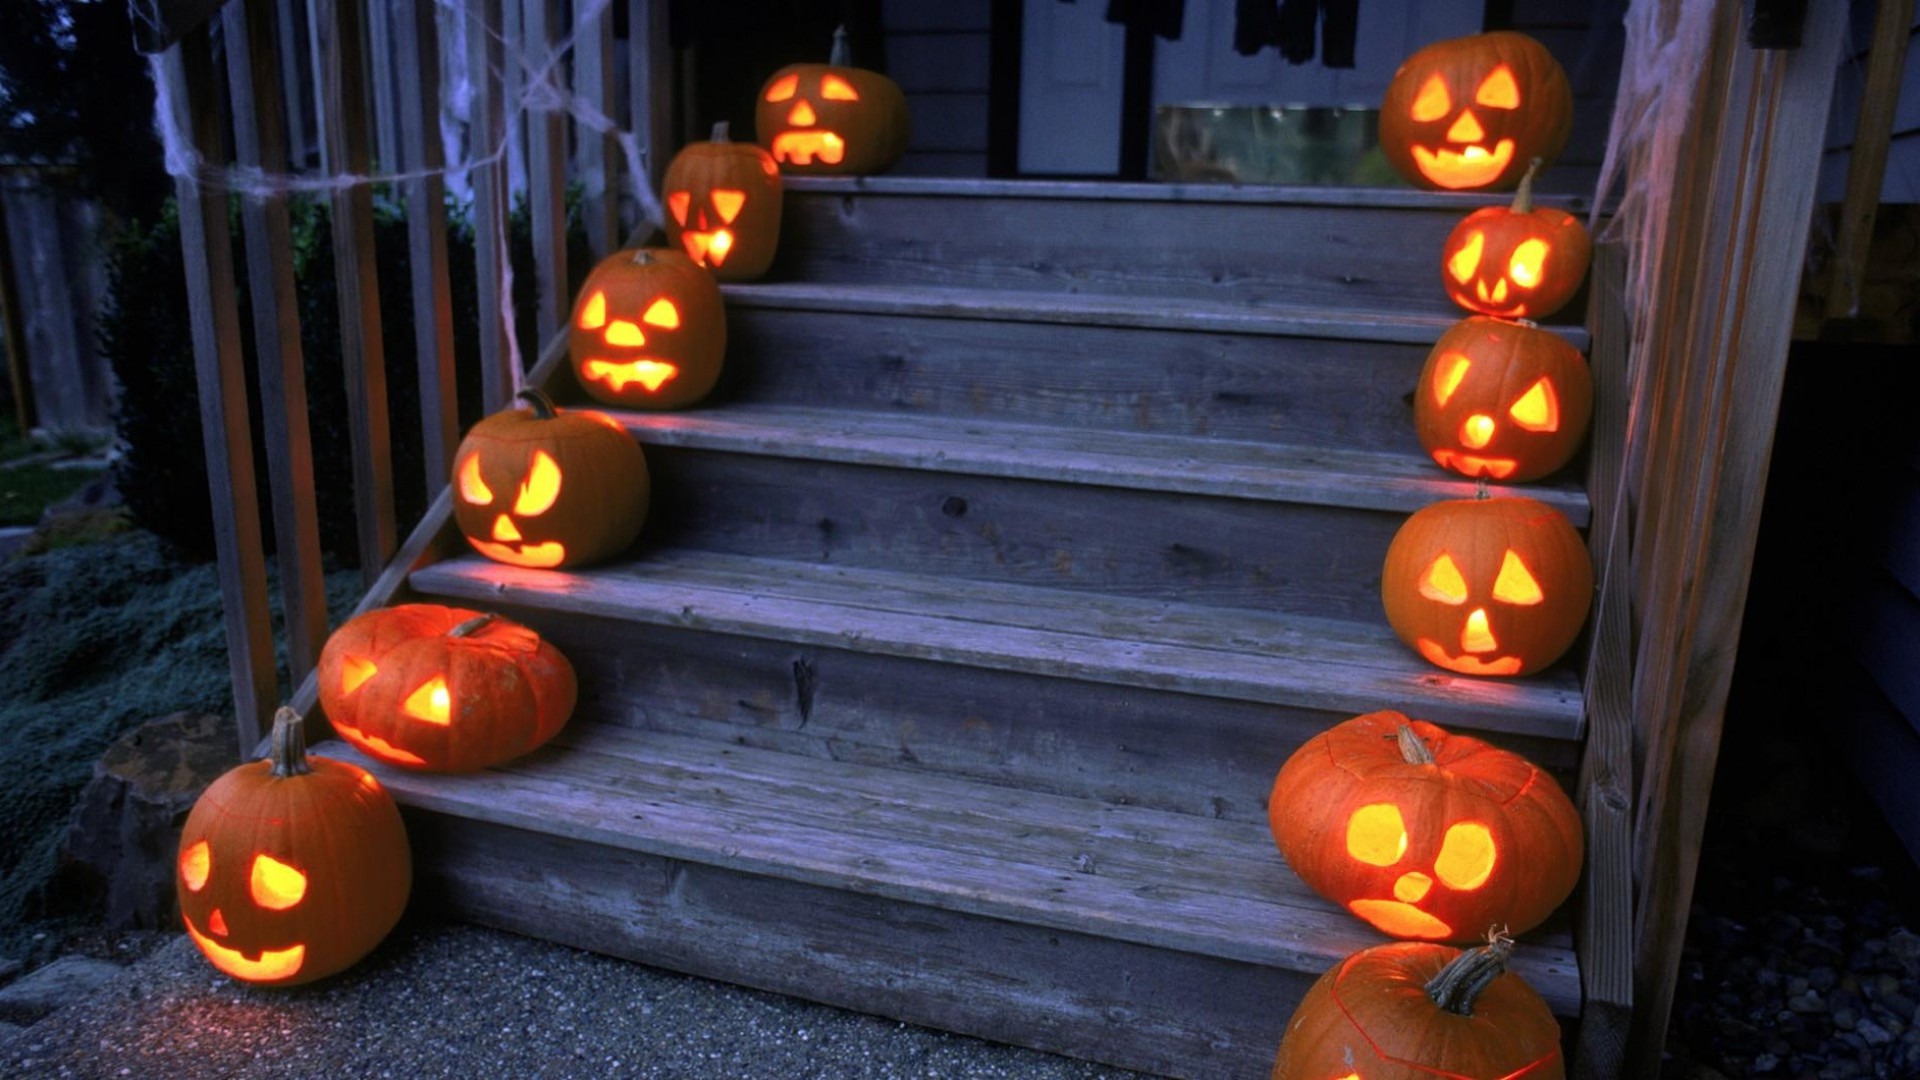 1920x1080 ... Background Full HD 1080p.  Wallpaper halloween, holiday,  pumpkin, stairs, porch